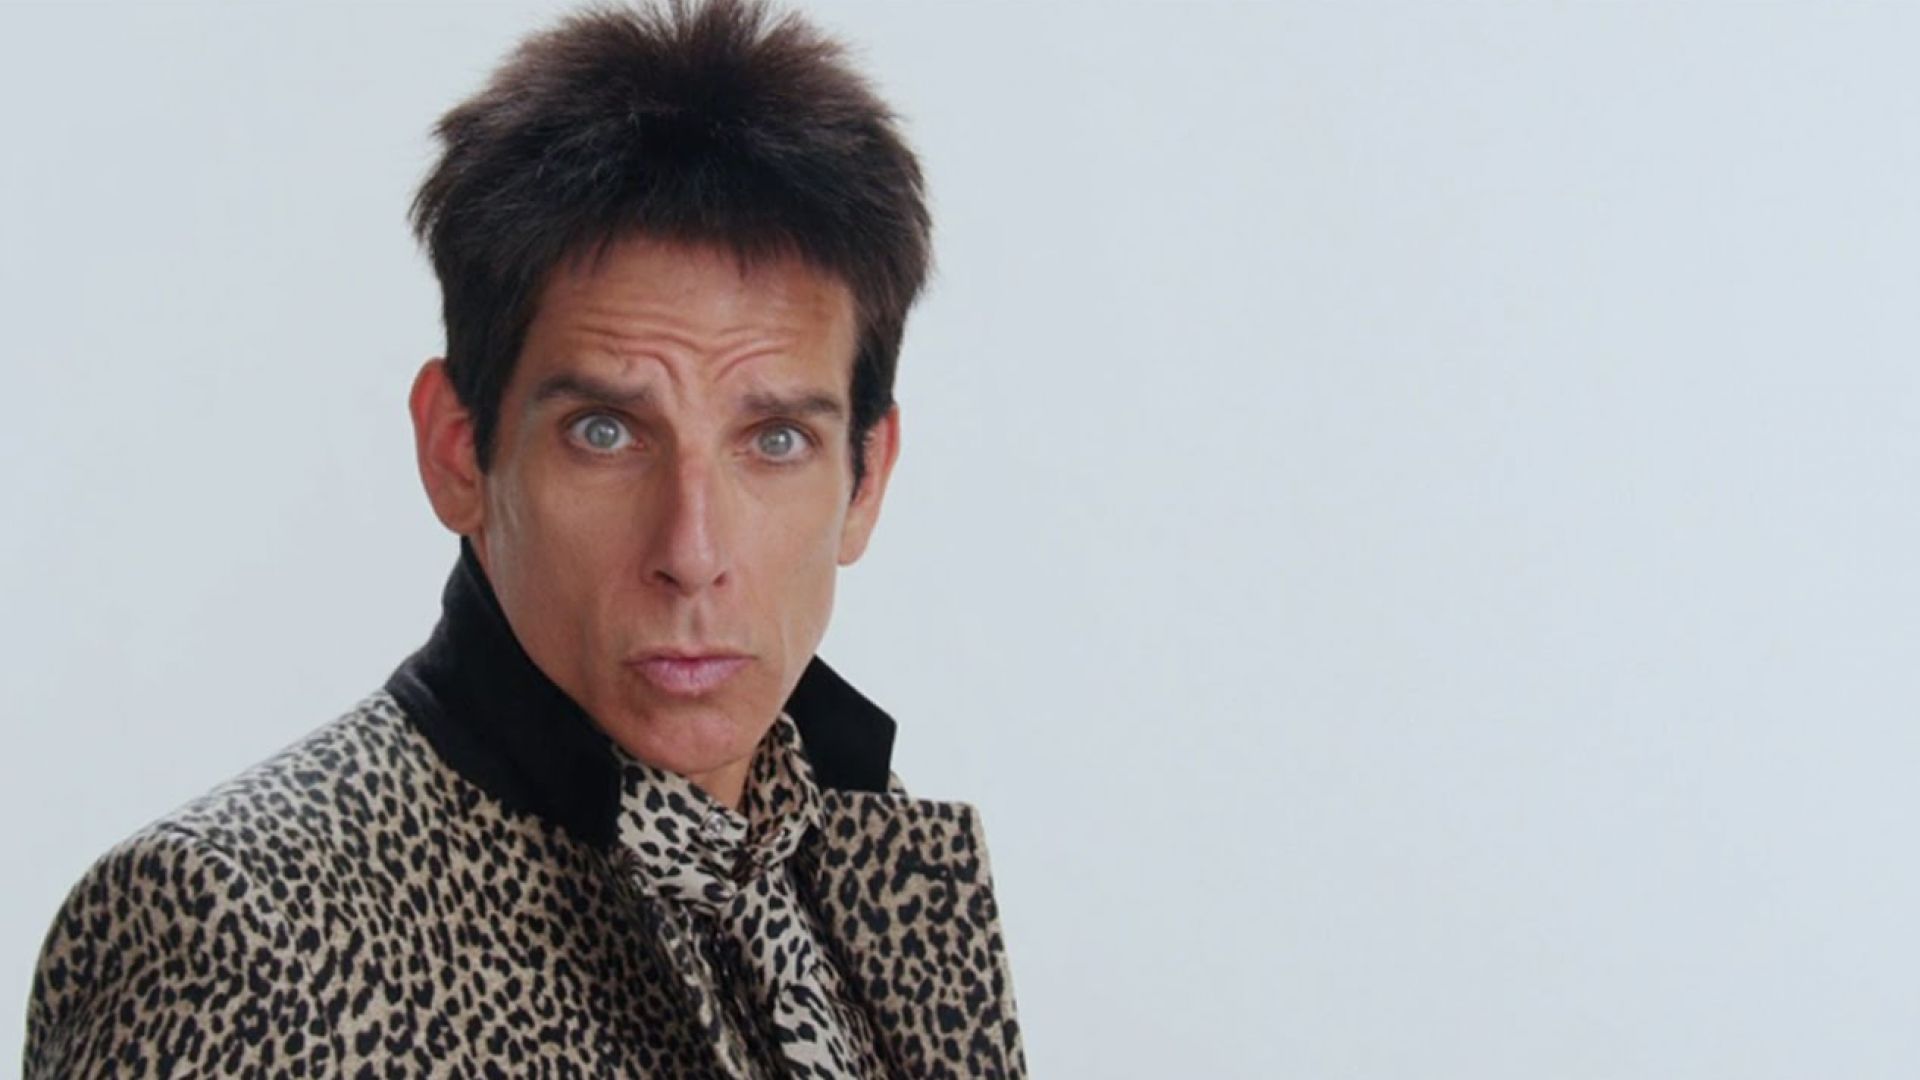 Stephan Hawking Introduces &#039;Zoolander 2&#039; in New Teaser Trail